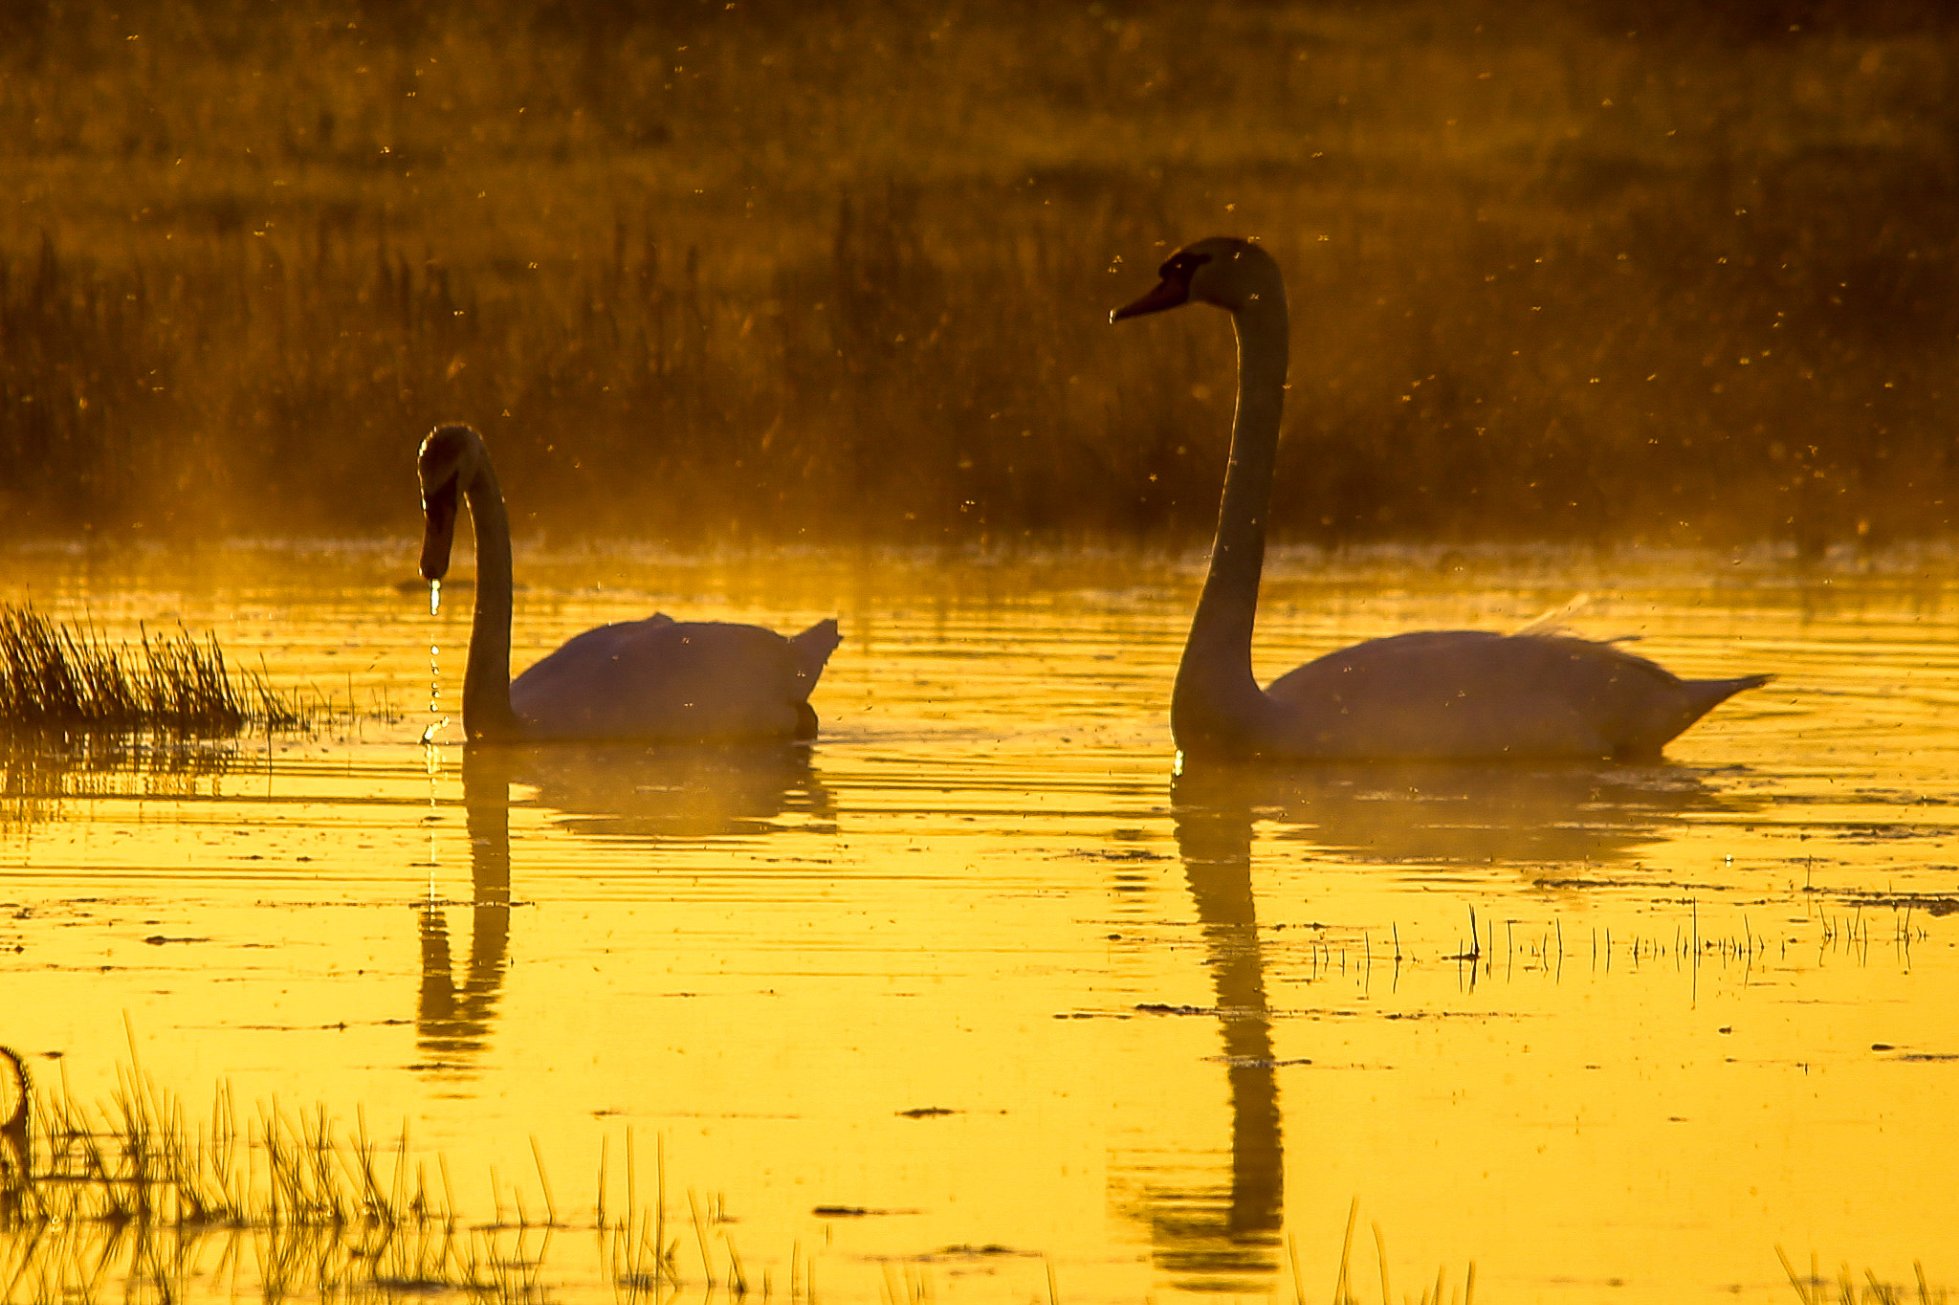 Swans at sunset in Stronsay - image by Iain Johnston